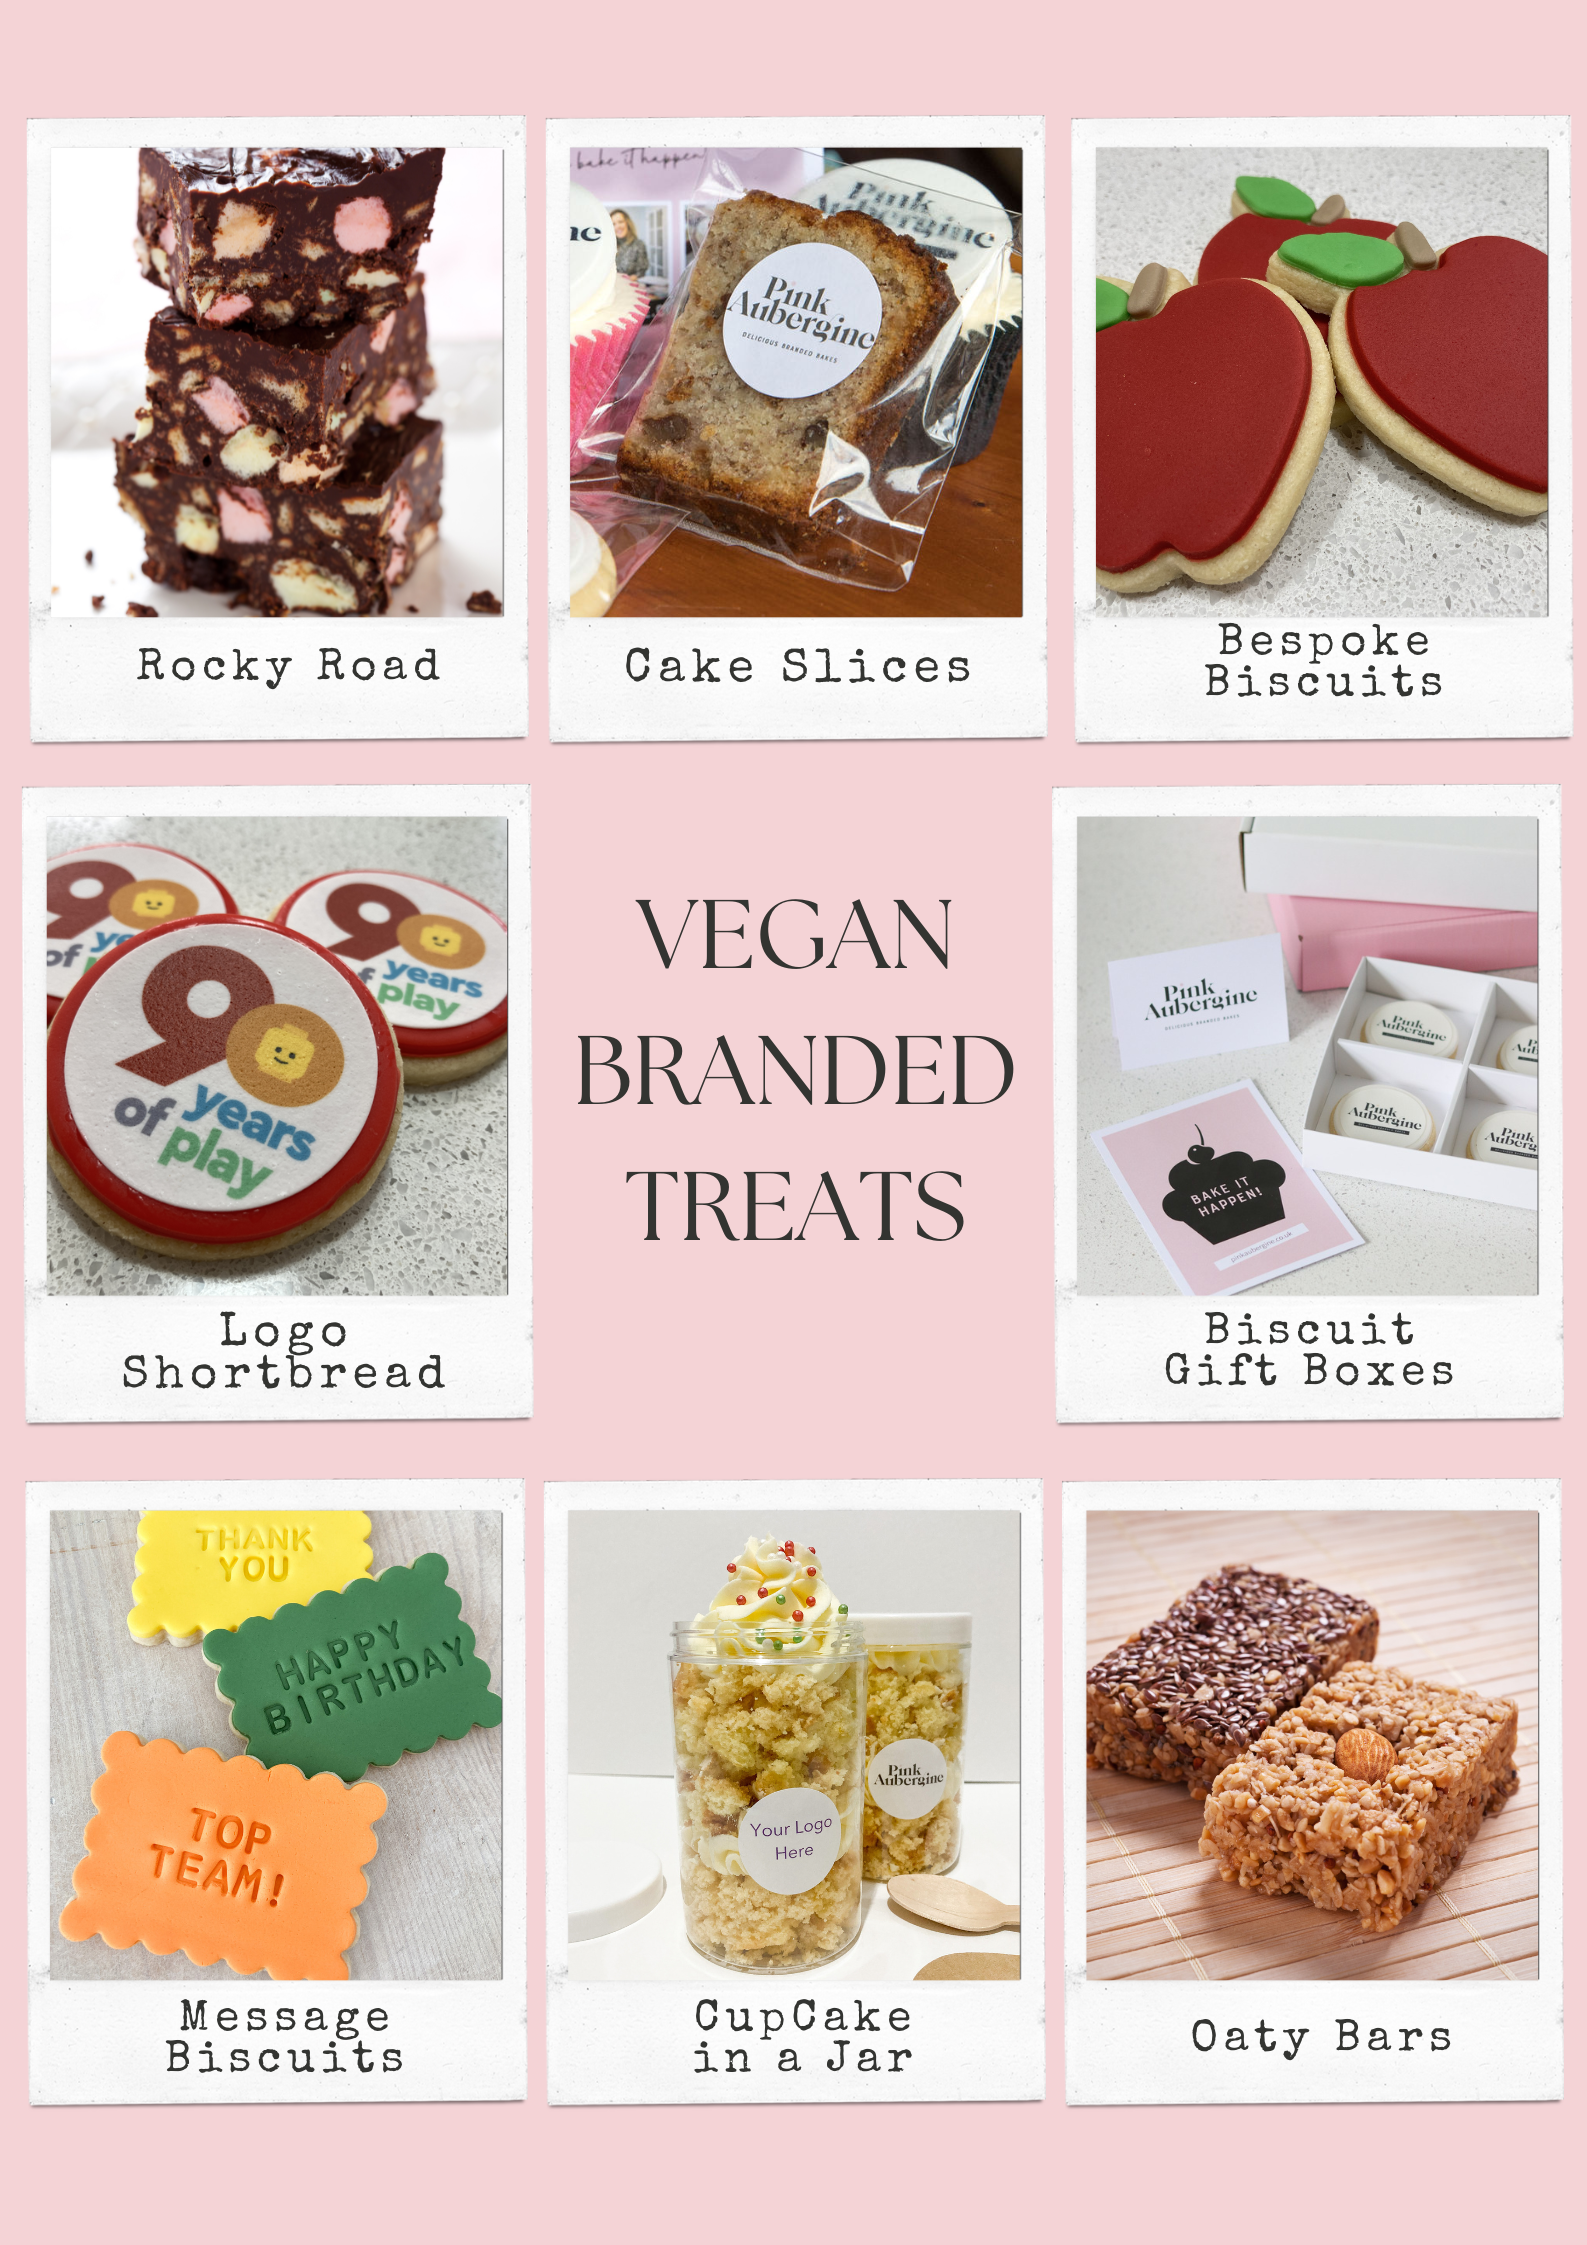 Image showing logo branded vegan sweet treats - Shortbread Biscuits - Cookies - Flapjacks - Millionnaires Shortbread - Message Cookies - Cupcake in a Jar - Letterbox Gifts